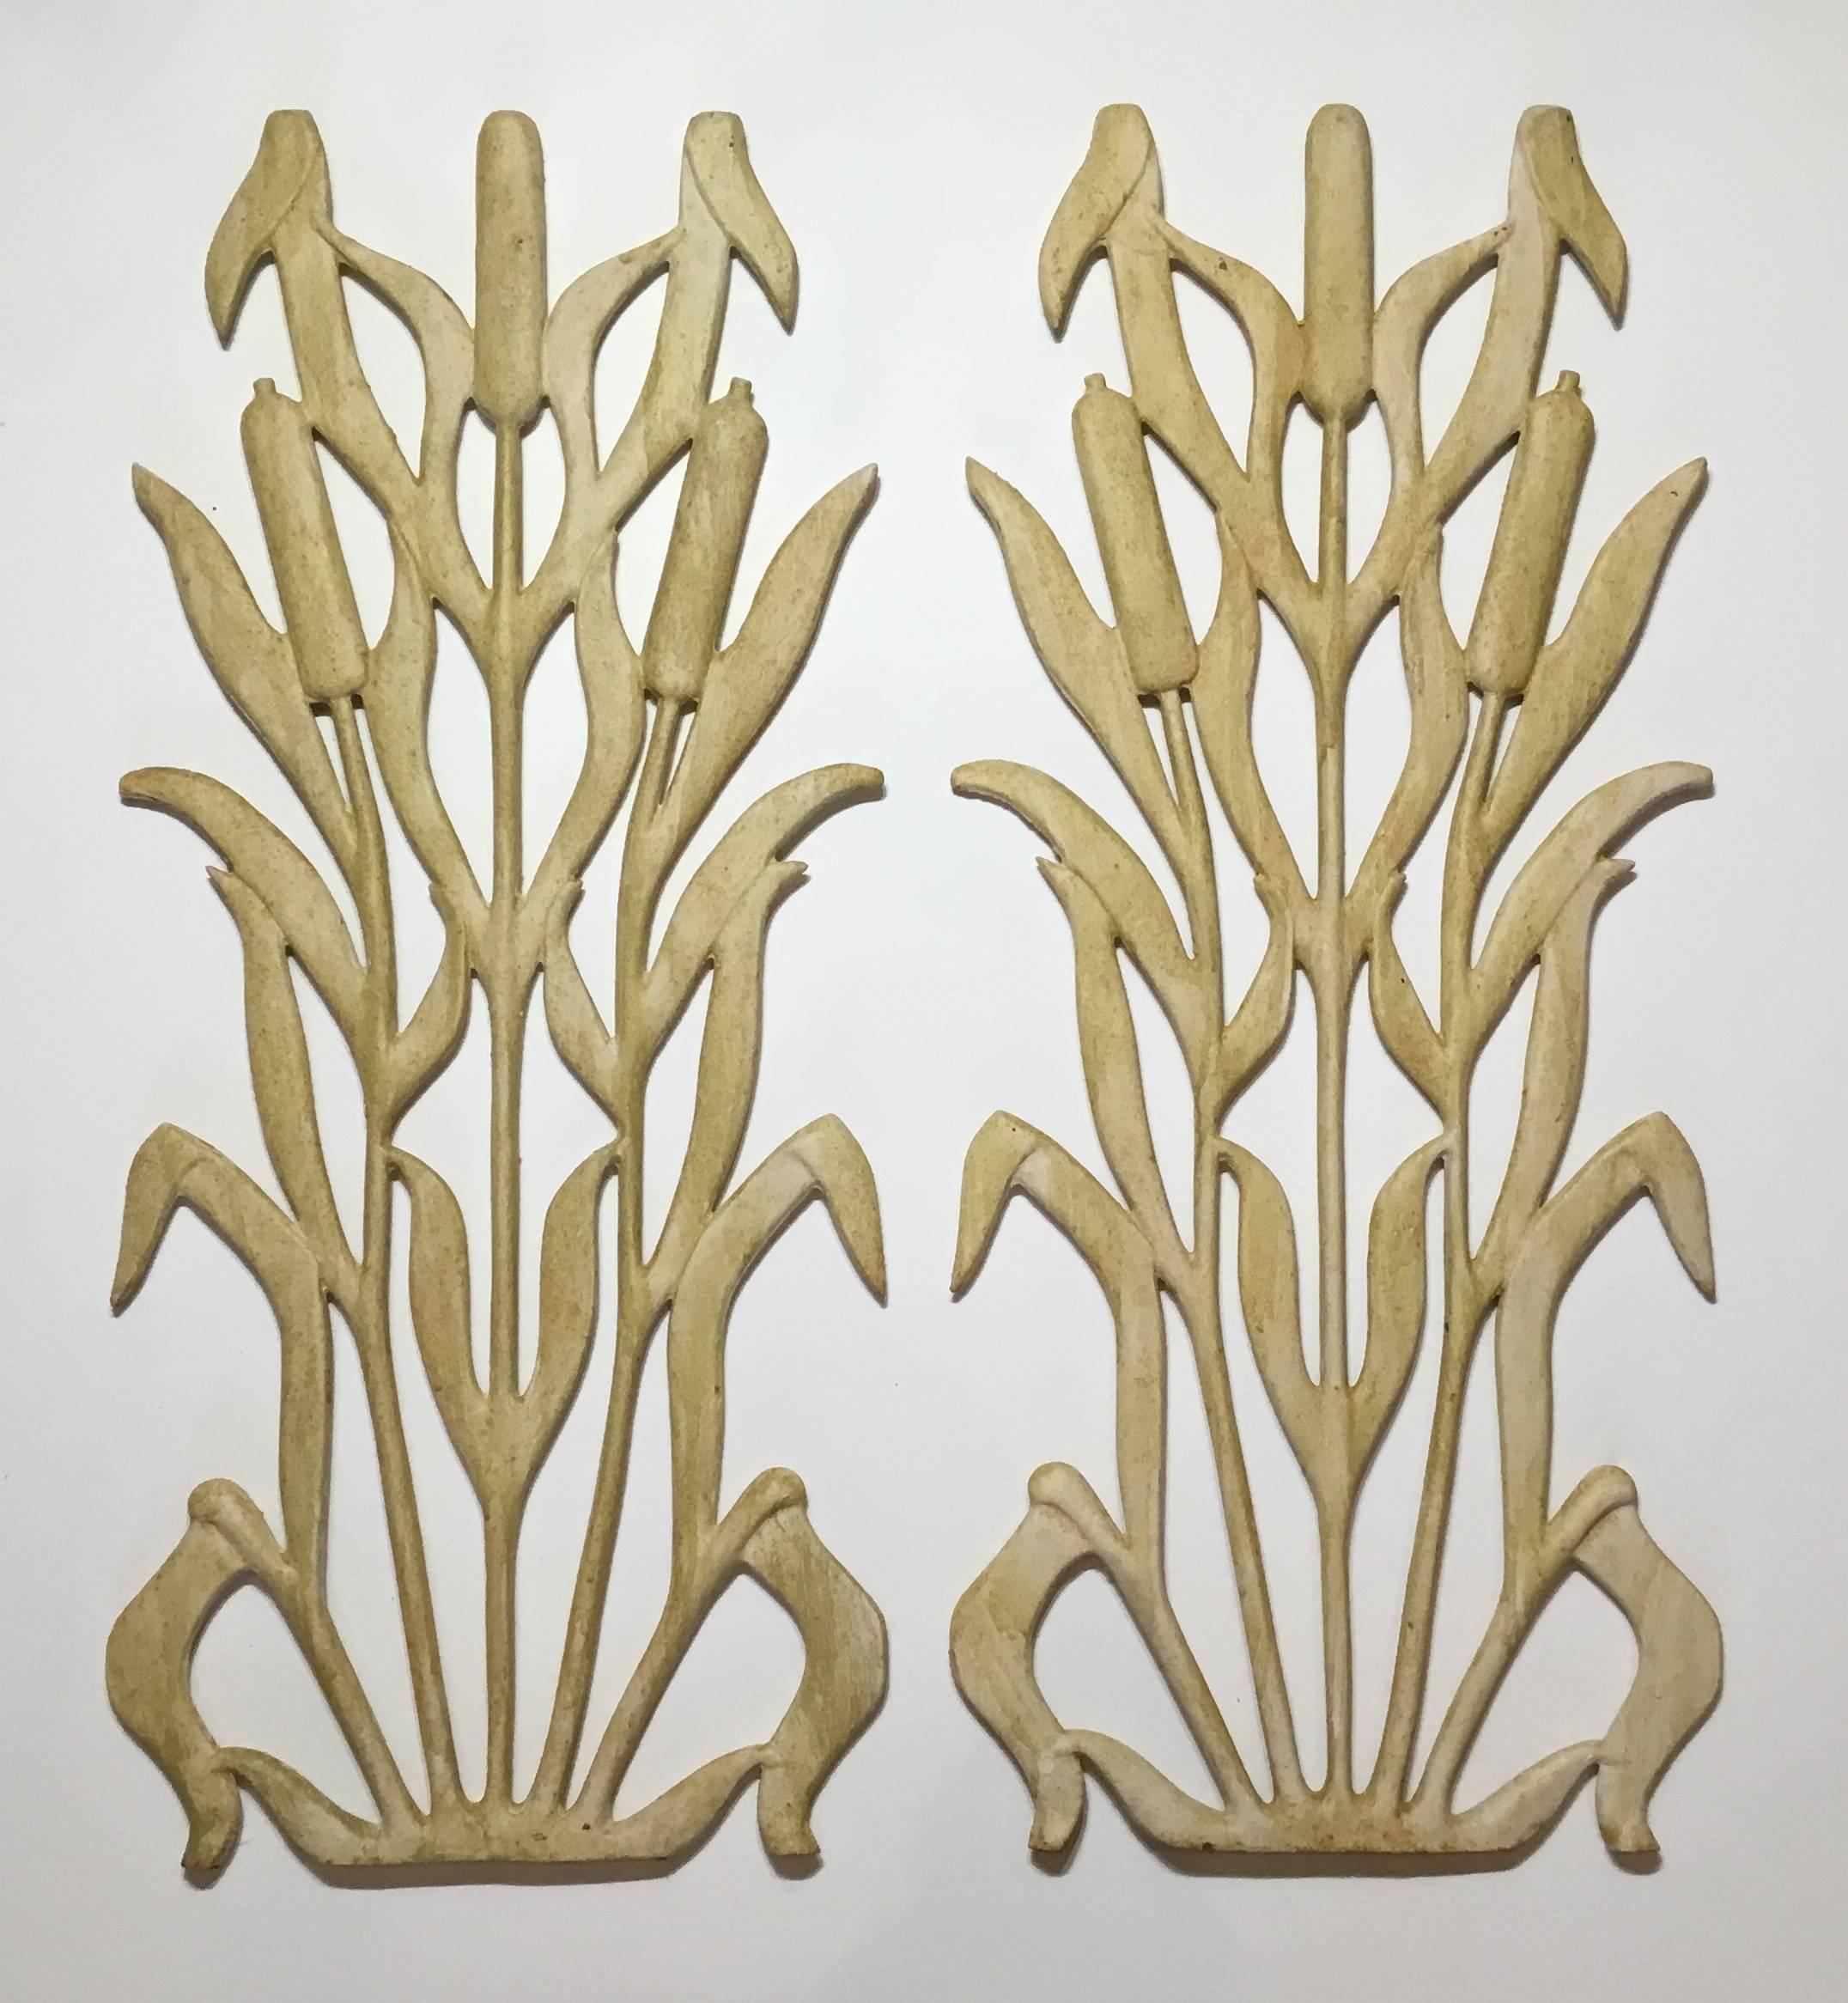 20th Century Pair of Architectural Cast Iron Wall Hanging